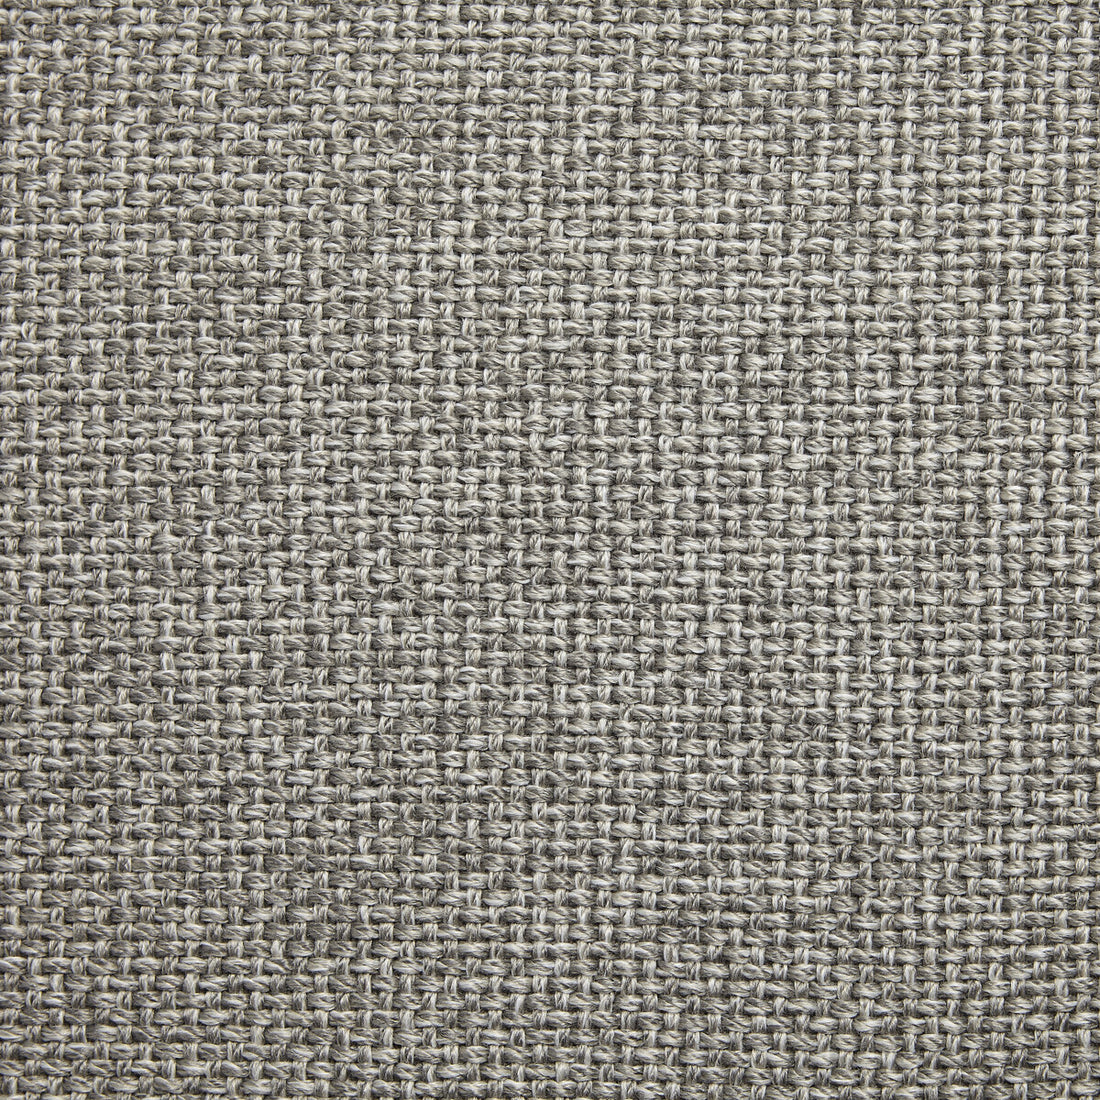 Begur fabric in 9 color - pattern LZ-30397.09.0 - by Kravet Design in the Lizzo Indoor/Outdoor collection